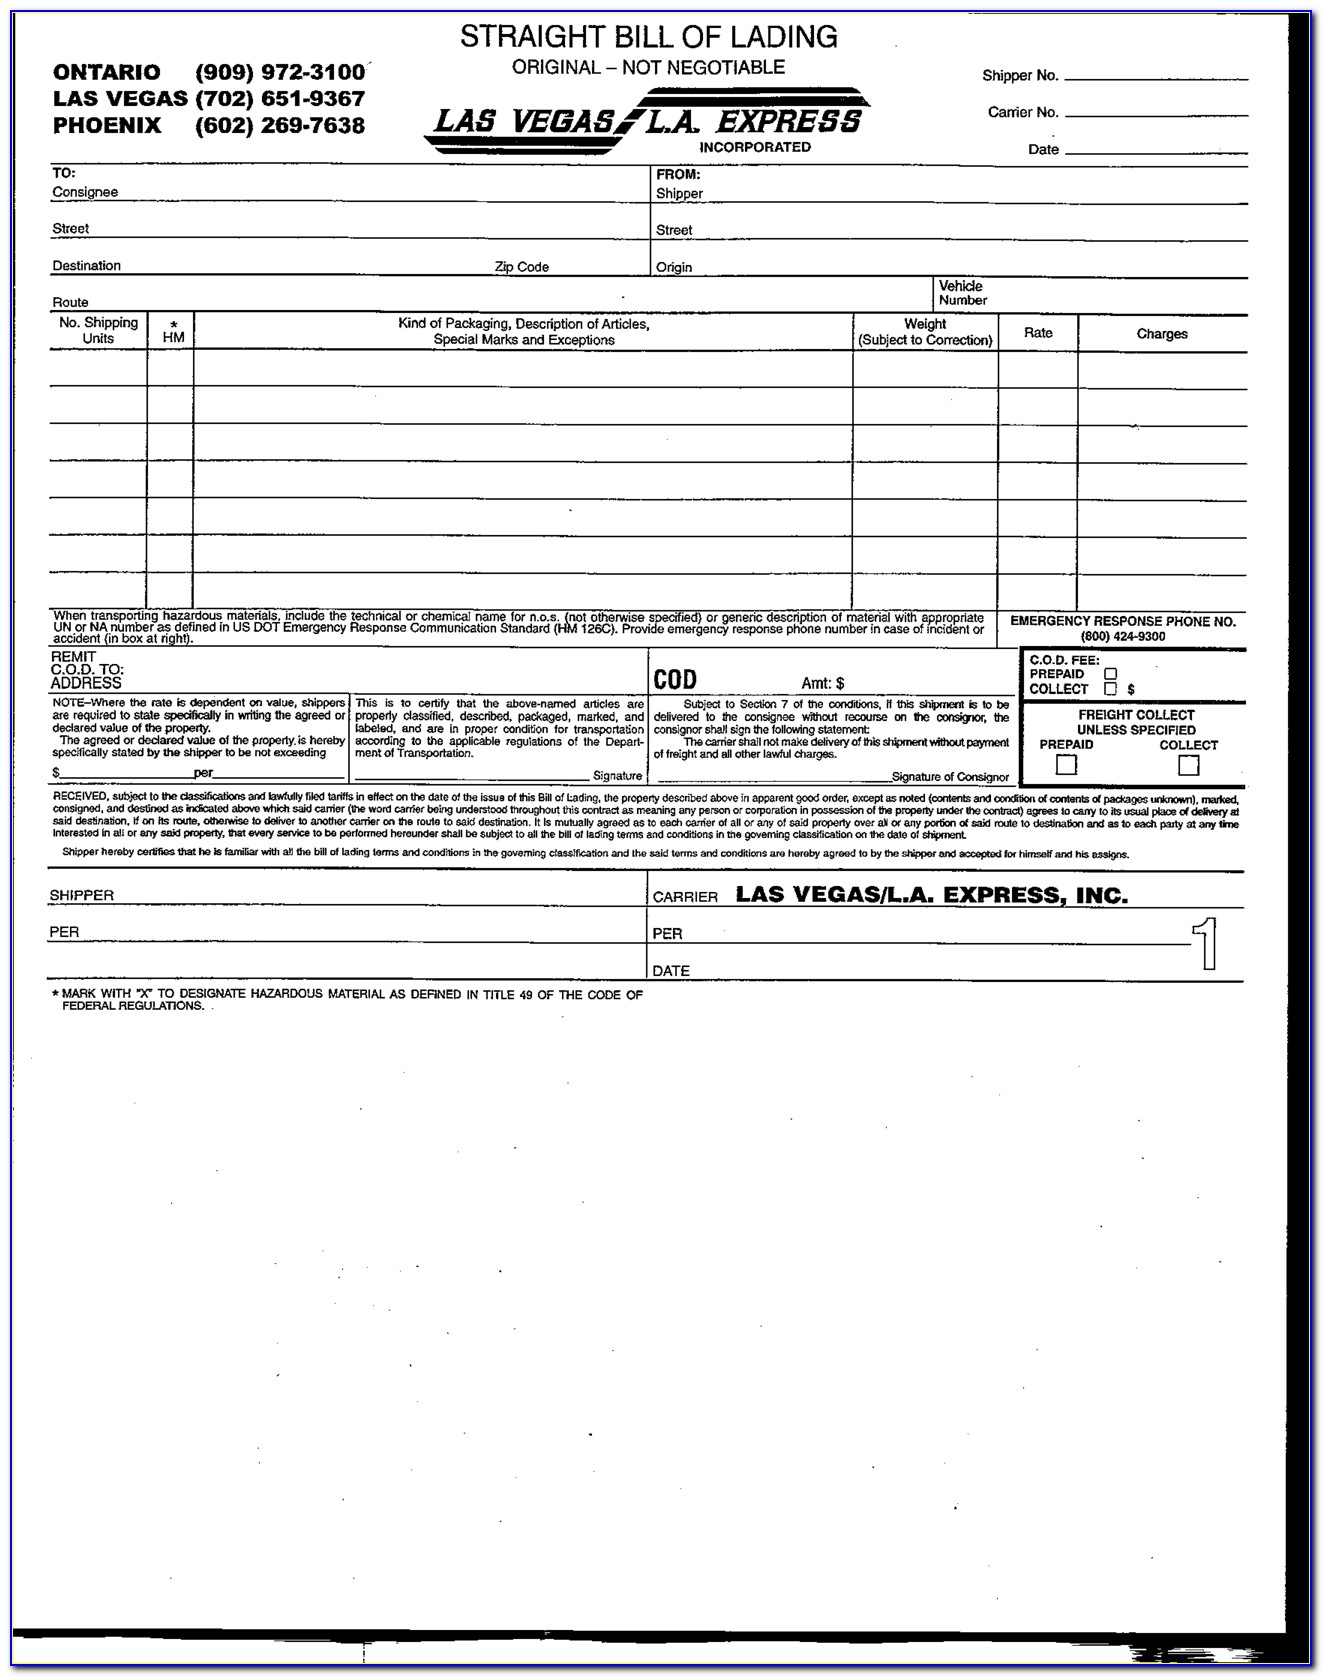 Generic Straight Bill Of Lading Template